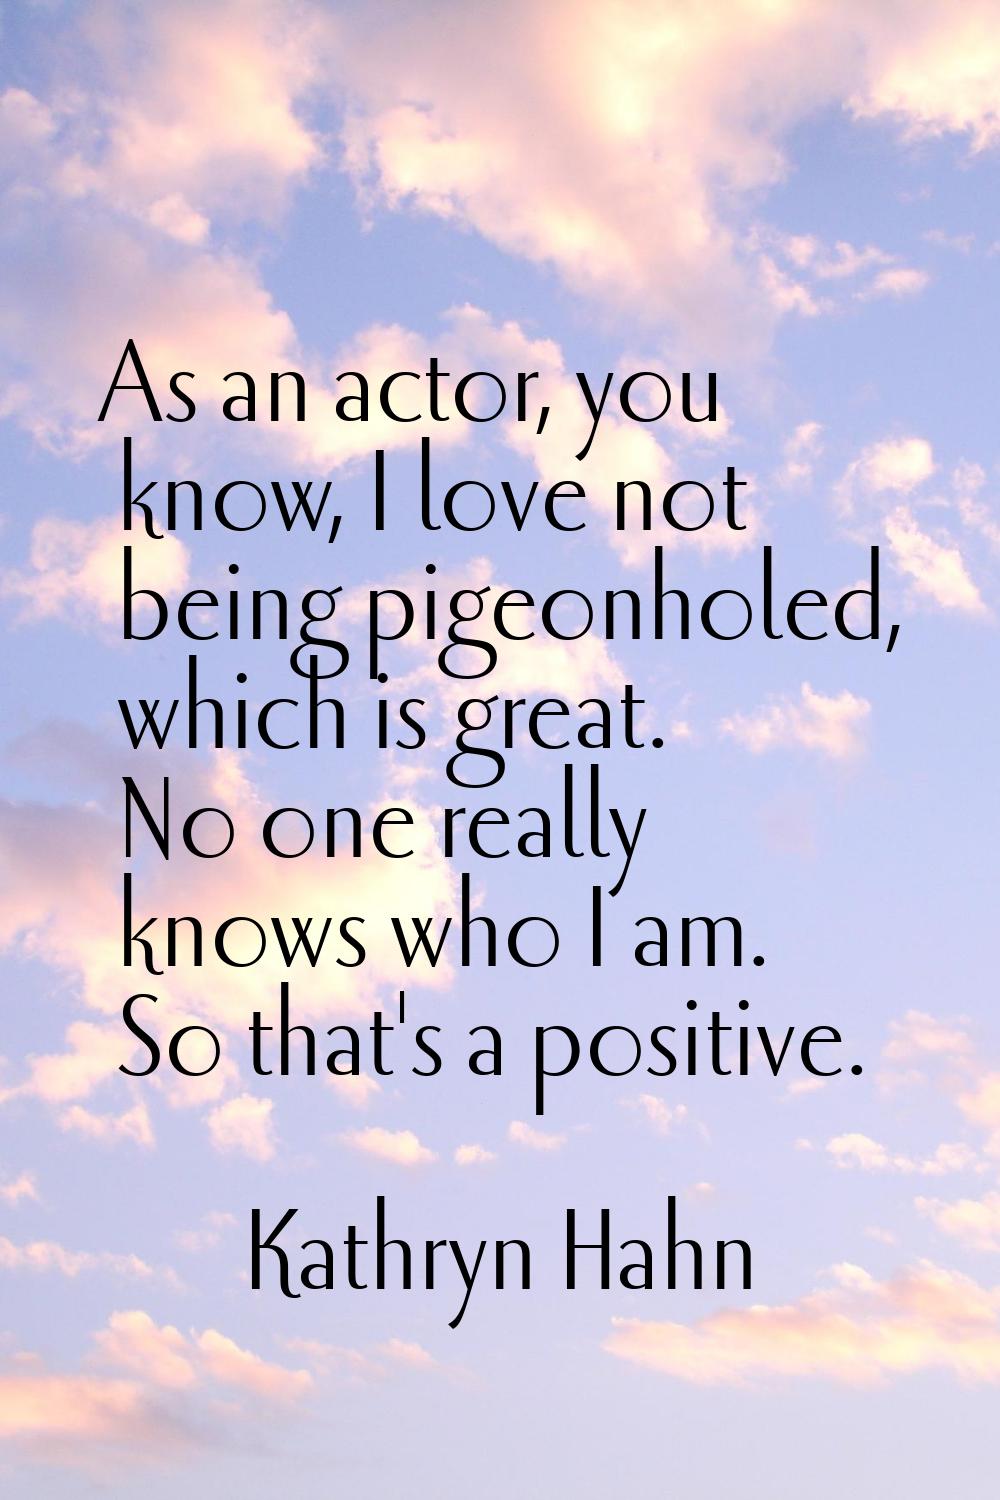 As an actor, you know, I love not being pigeonholed, which is great. No one really knows who I am. 